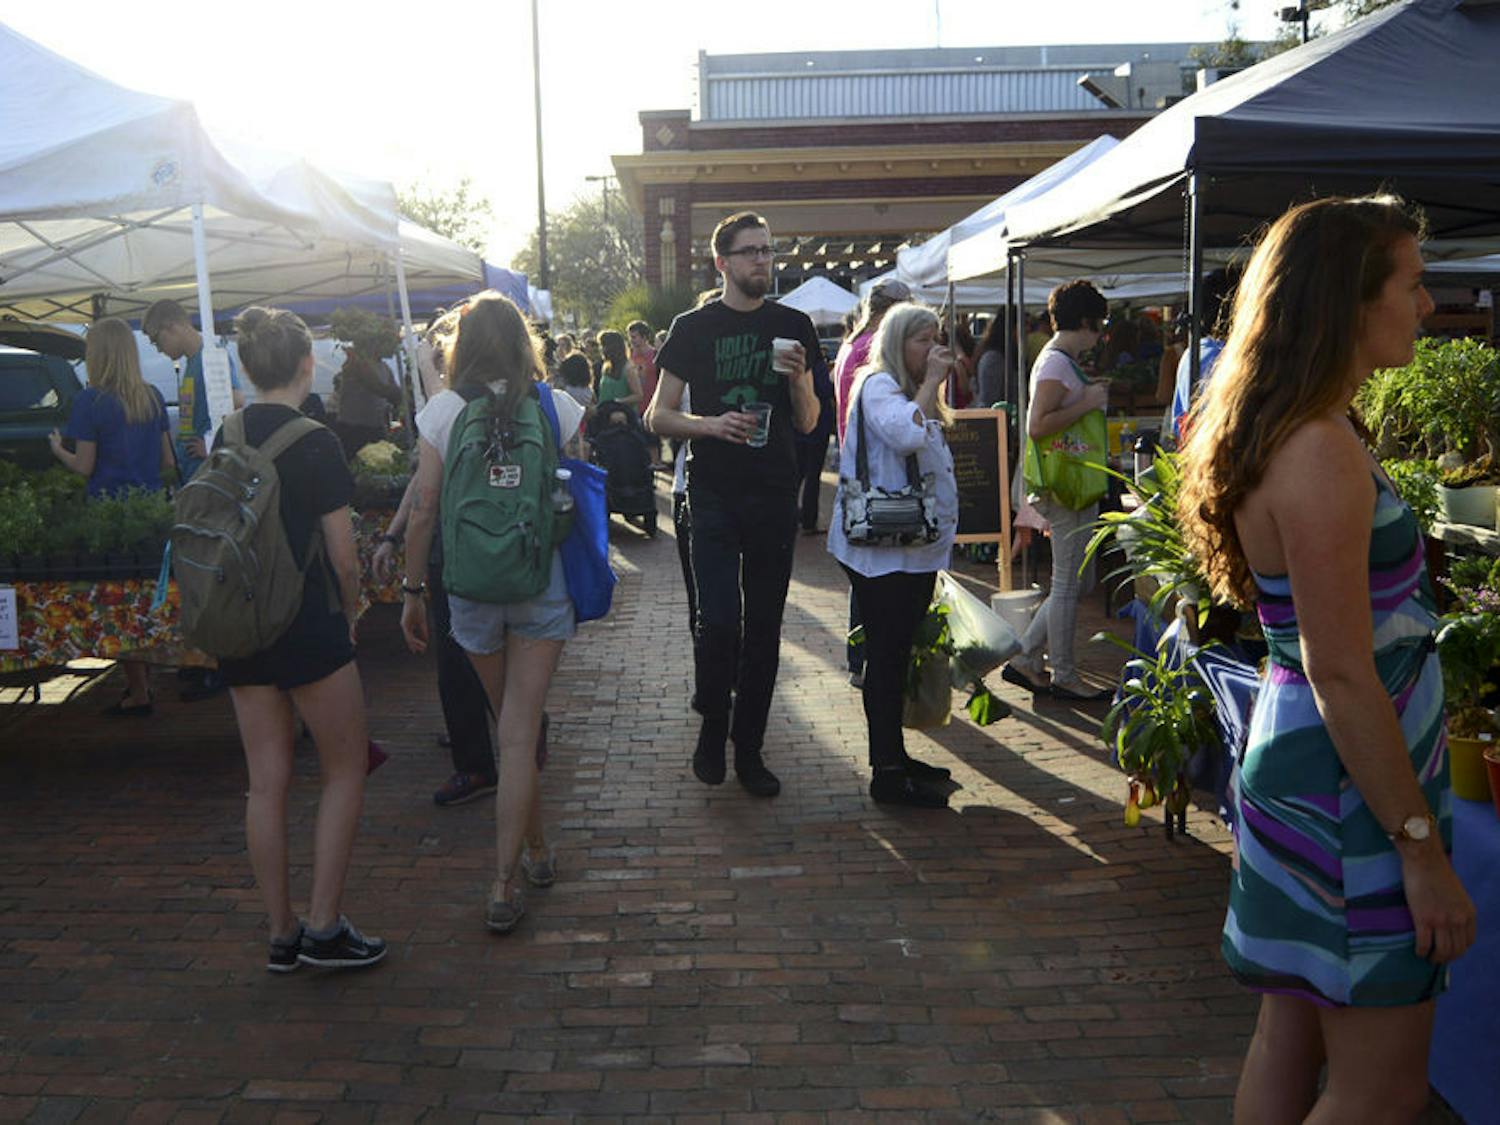 Gainesville residents browse vendors’ wares on Wednesday afternoon at the first Union Street Farmers Market after the Bo Diddley Plaza renovation. Previously, the farmers market was being held on Lot 10 in downtown Gainesville.